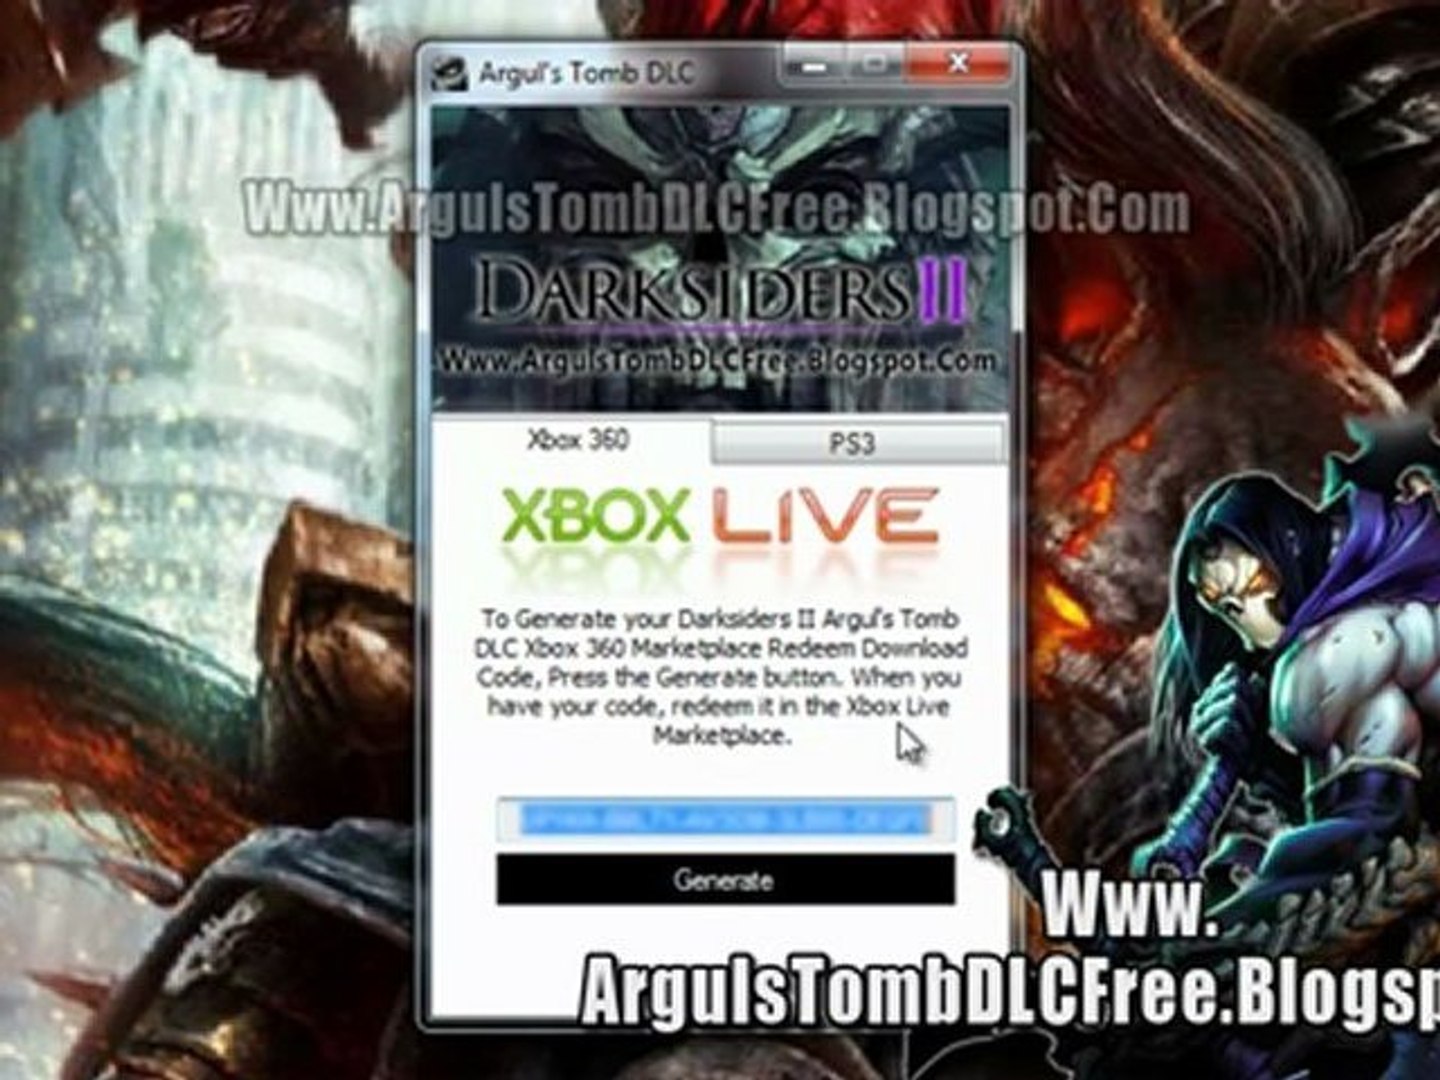 Darksiders 2 Argul's Tomb DLC Codes Leaked - video Dailymotion